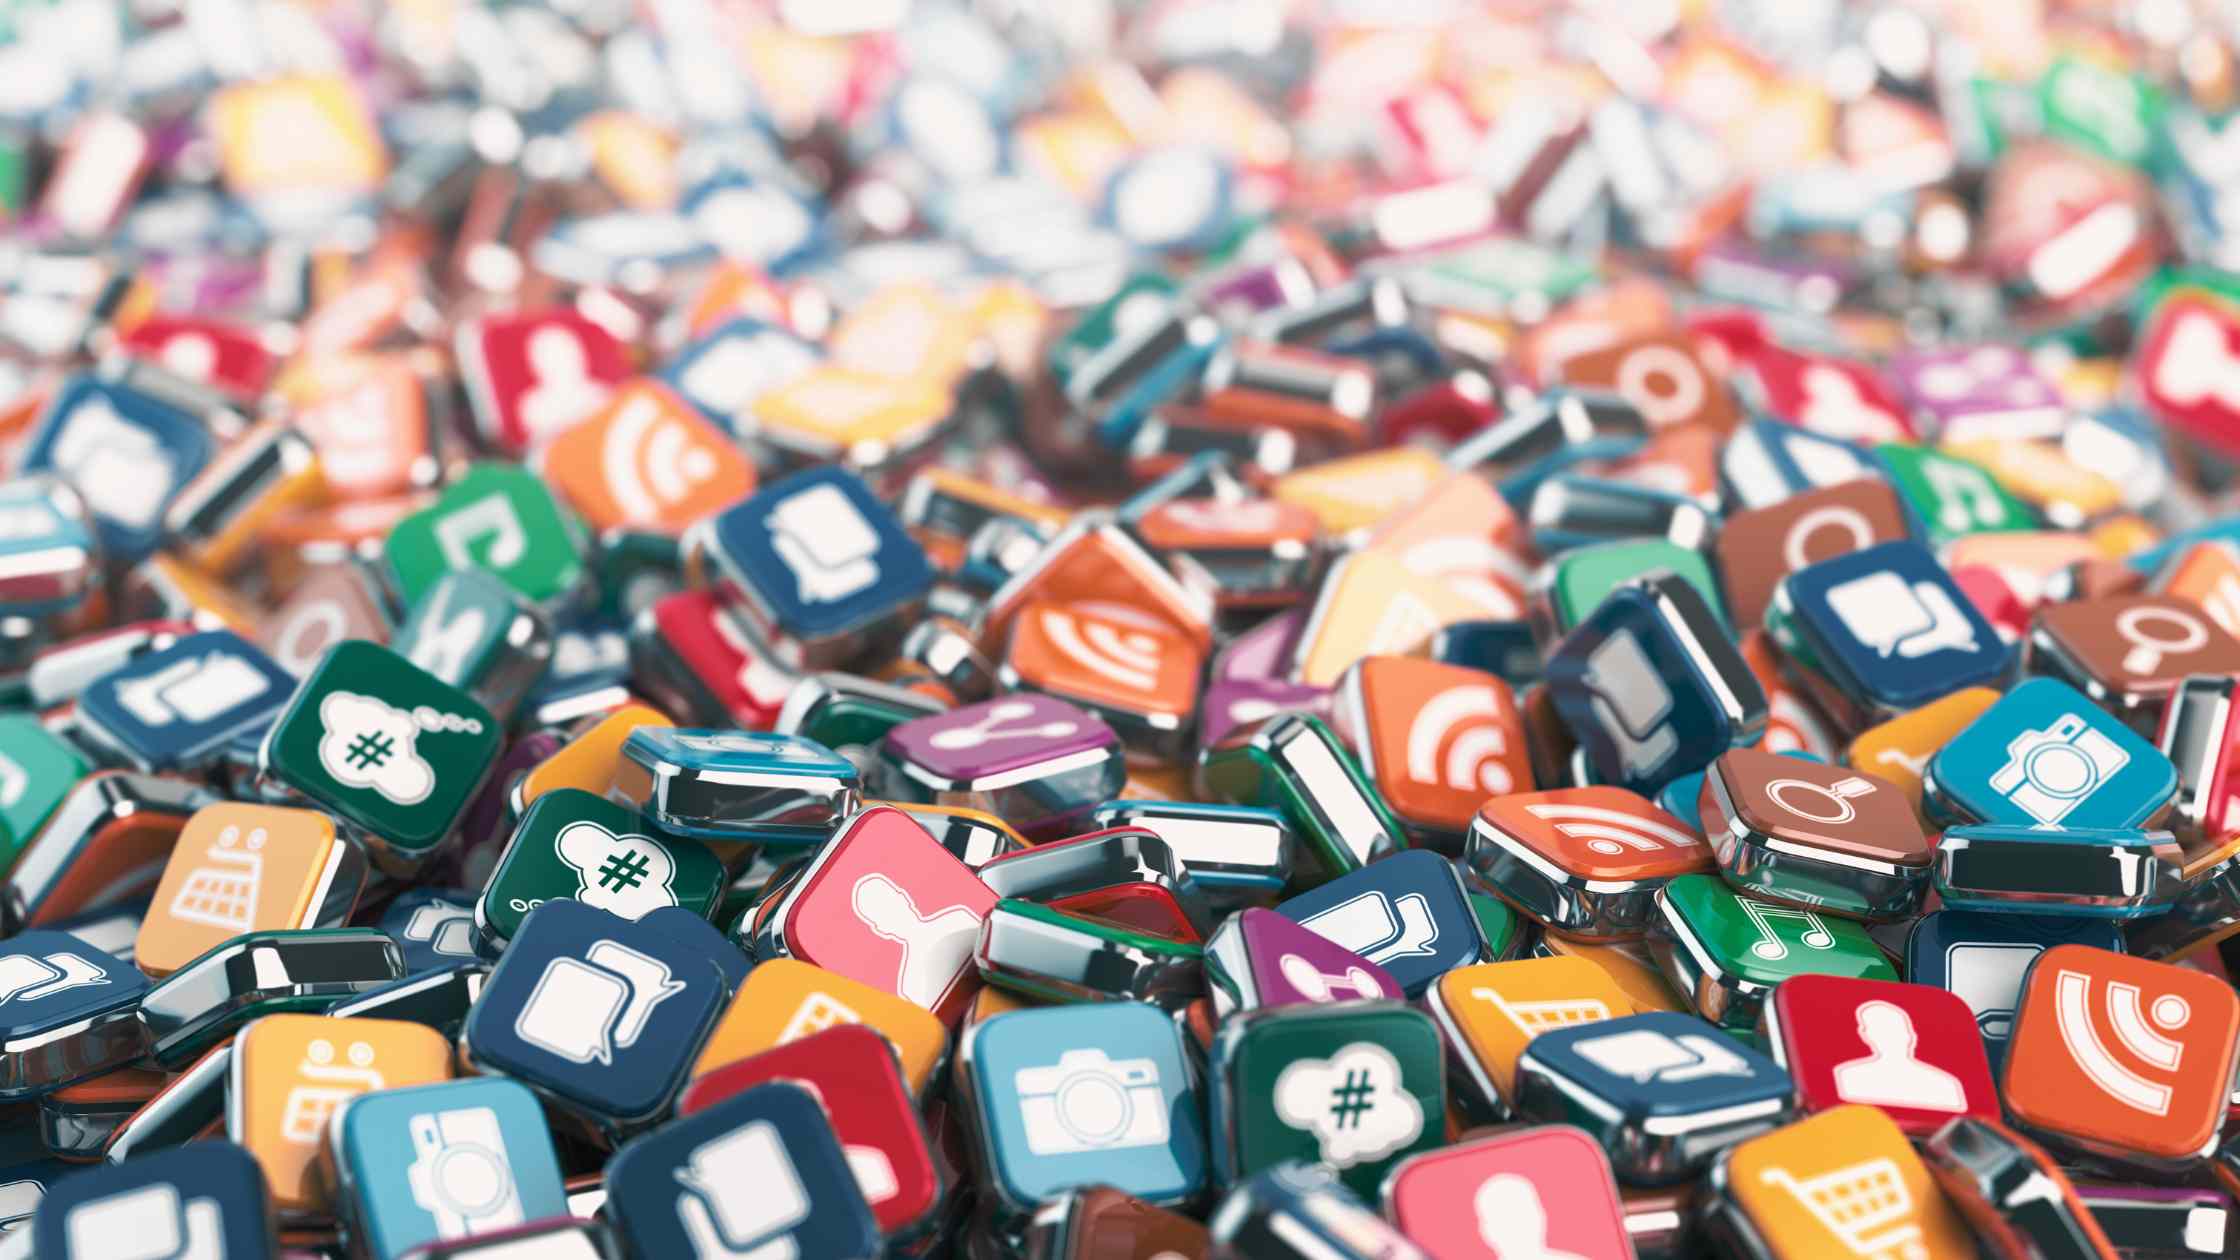 Large pile of colourful app icons in 3D rendering